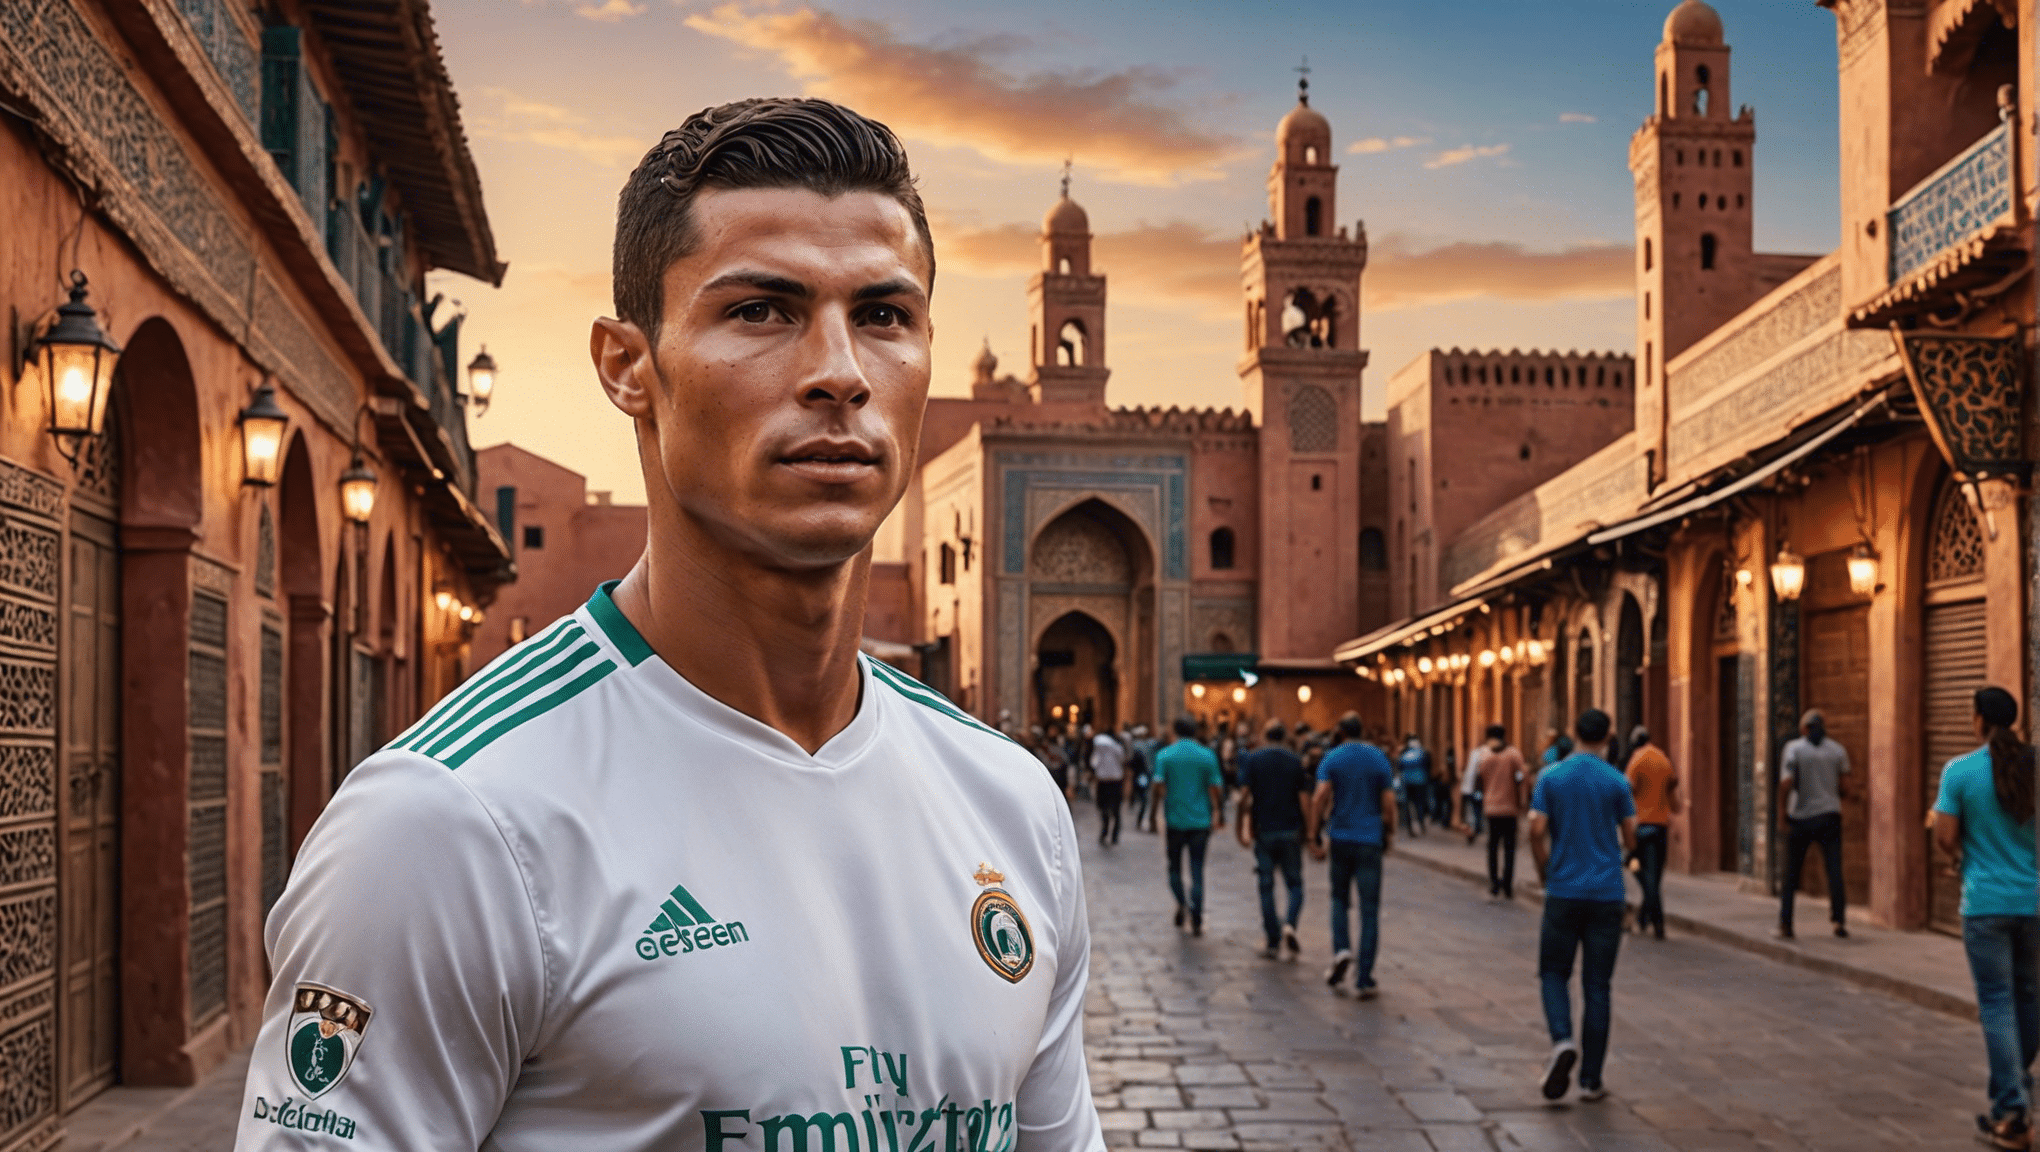 experience cristiano ronaldo's deep affection for marrakesh and discover the beauty of this moroccan city through his eyes.